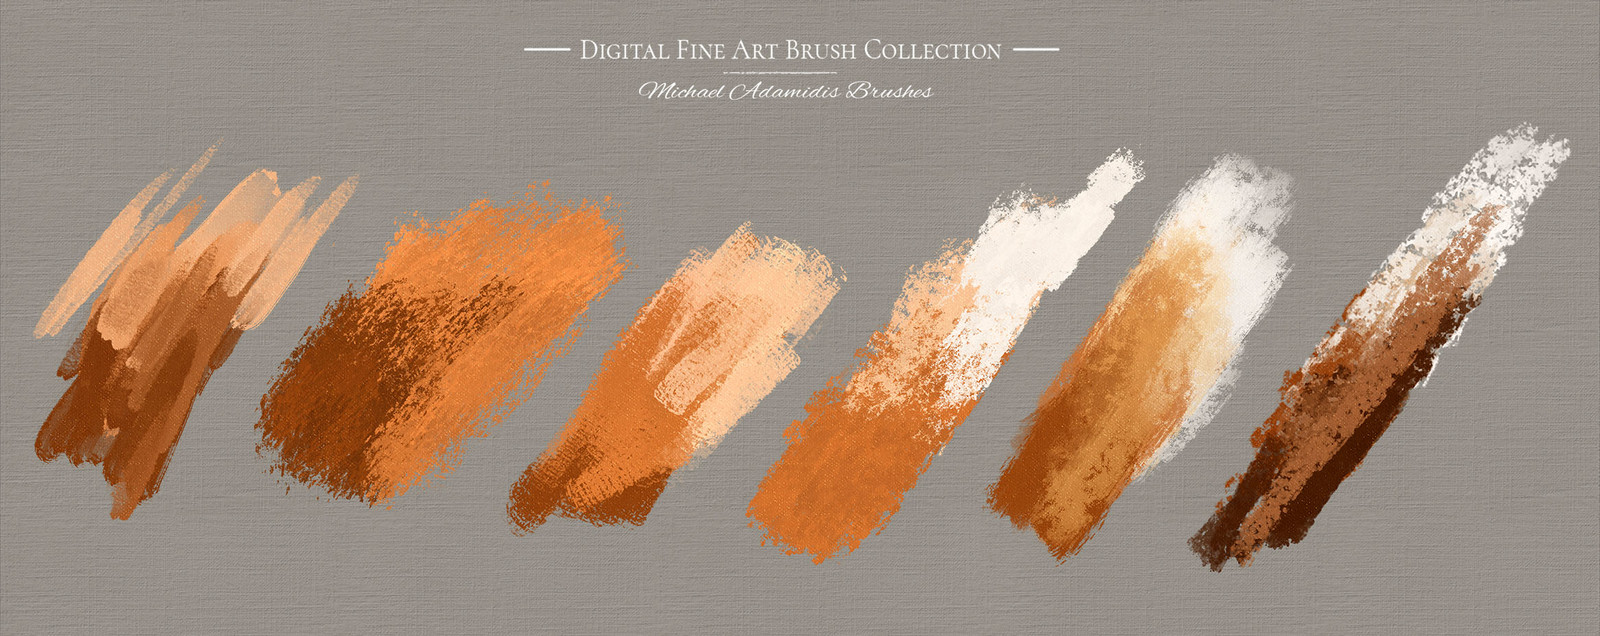 Here is an amazing example of the brushes of the MA-Brush Pack